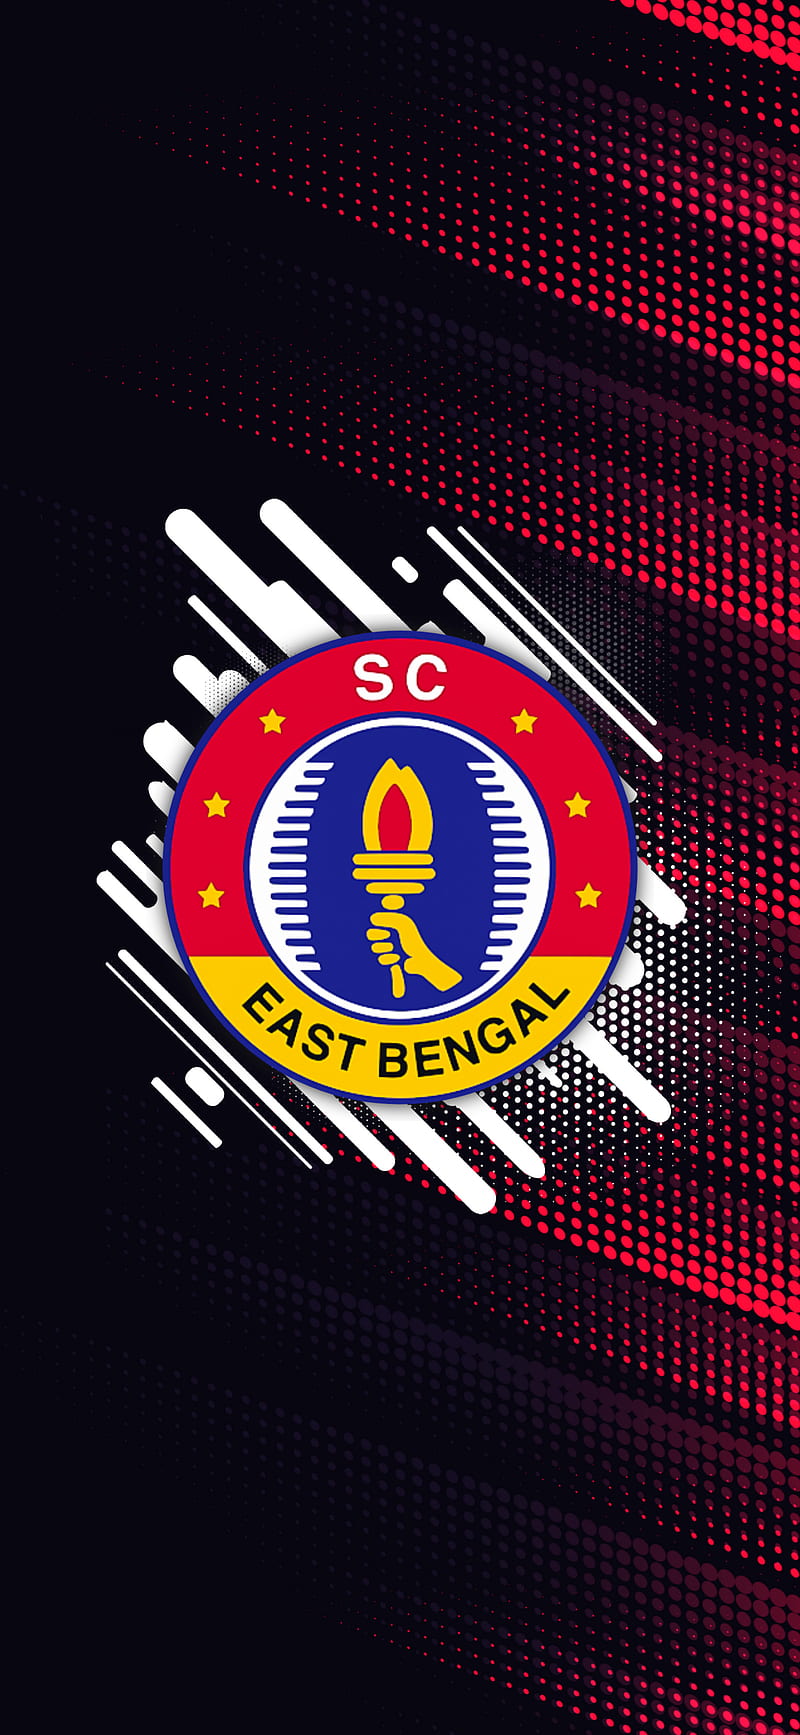 SC EAST BENGAL wallpaper by Souviks008  Download on ZEDGE  ce59